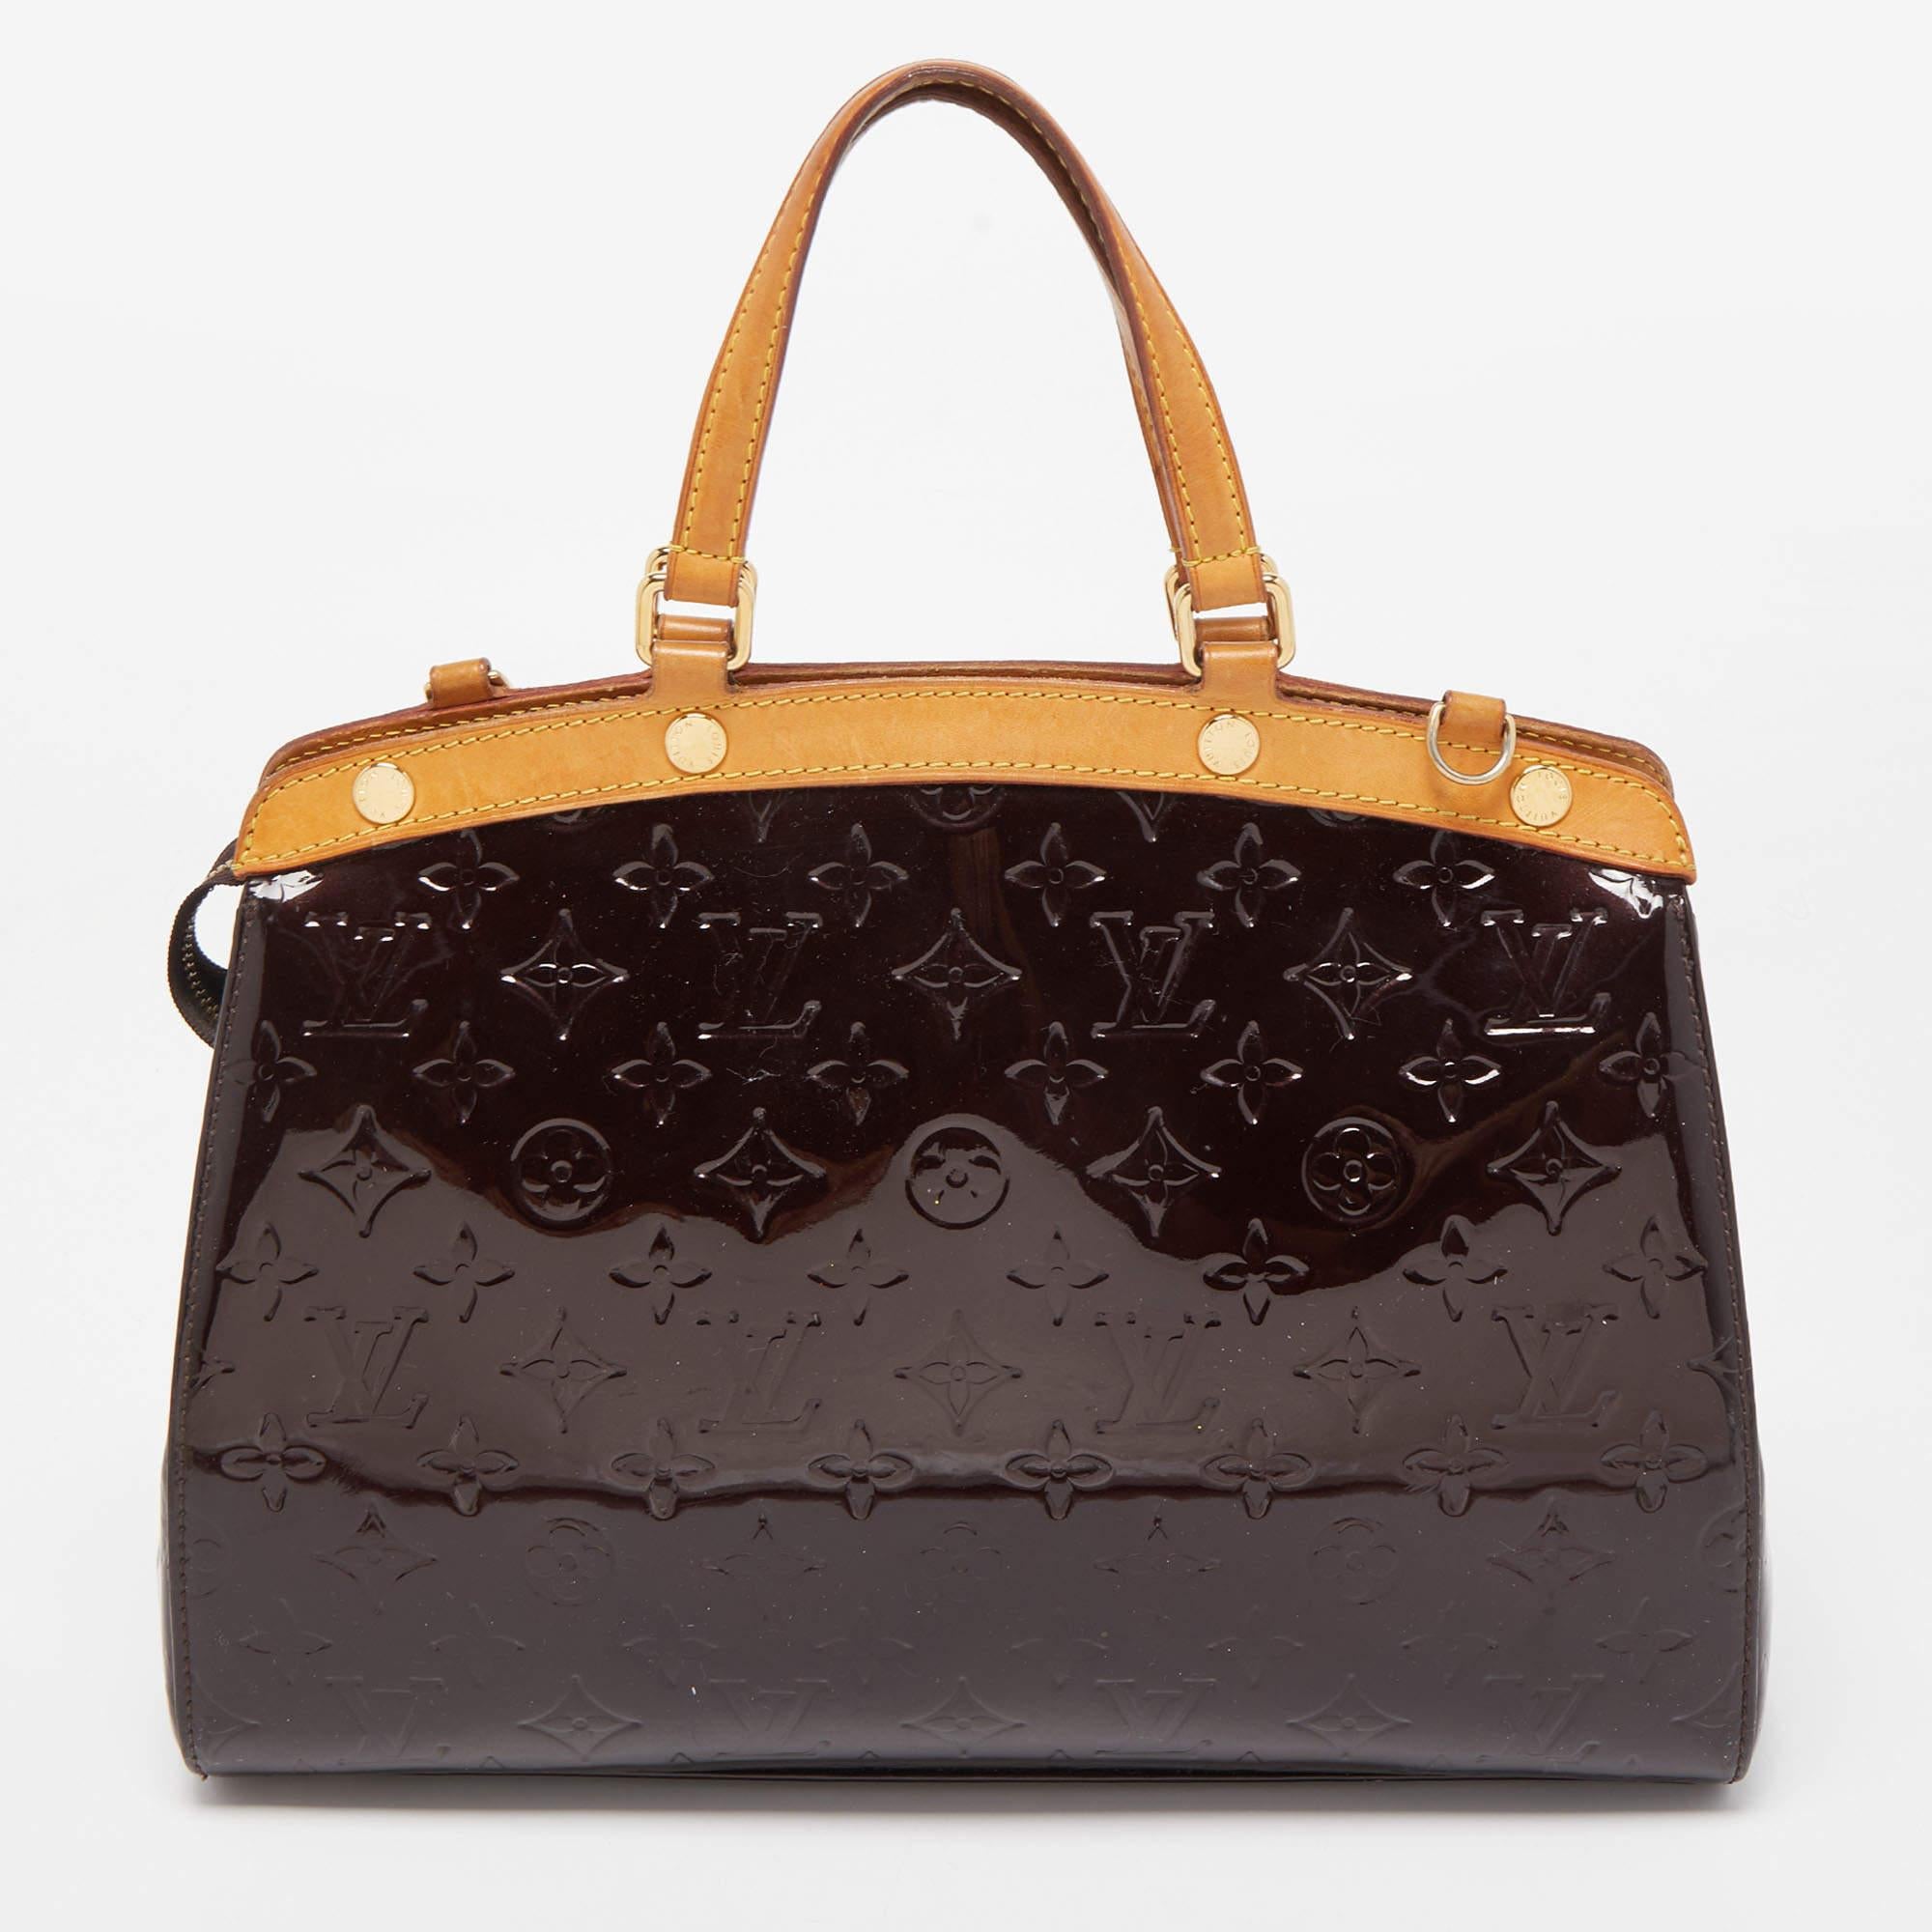 Give your essentials a stylish home with this Louis Vuitton Brea bag. Made using the best materials, the LV women's bag has an impeccable construction and the perfect finish.

Includes: Original Dustbag, Info Booklet, Strap

